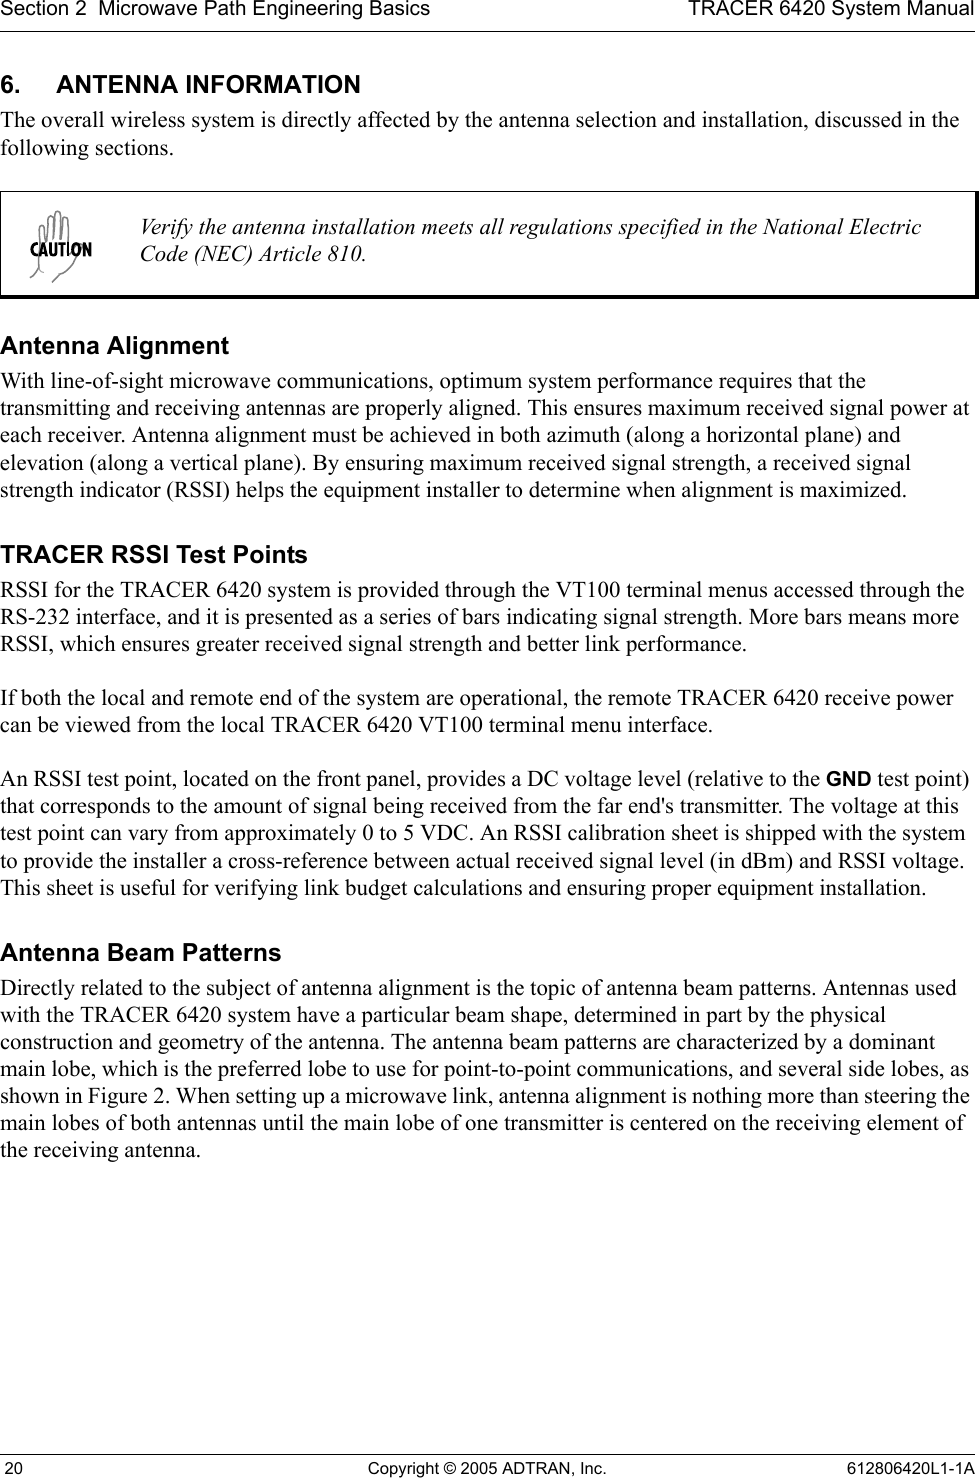 Section 2  Microwave Path Engineering Basics TRACER 6420 System Manual 20 Copyright © 2005 ADTRAN, Inc. 612806420L1-1A6. ANTENNA INFORMATIONThe overall wireless system is directly affected by the antenna selection and installation, discussed in the following sections.Antenna AlignmentWith line-of-sight microwave communications, optimum system performance requires that the transmitting and receiving antennas are properly aligned. This ensures maximum received signal power at each receiver. Antenna alignment must be achieved in both azimuth (along a horizontal plane) and elevation (along a vertical plane). By ensuring maximum received signal strength, a received signal strength indicator (RSSI) helps the equipment installer to determine when alignment is maximized. TRACER RSSI Test PointsRSSI for the TRACER 6420 system is provided through the VT100 terminal menus accessed through the RS-232 interface, and it is presented as a series of bars indicating signal strength. More bars means more RSSI, which ensures greater received signal strength and better link performance.If both the local and remote end of the system are operational, the remote TRACER 6420 receive power can be viewed from the local TRACER 6420 VT100 terminal menu interface.An RSSI test point, located on the front panel, provides a DC voltage level (relative to the GND test point) that corresponds to the amount of signal being received from the far end&apos;s transmitter. The voltage at this test point can vary from approximately 0 to 5 VDC. An RSSI calibration sheet is shipped with the system to provide the installer a cross-reference between actual received signal level (in dBm) and RSSI voltage. This sheet is useful for verifying link budget calculations and ensuring proper equipment installation.Antenna Beam PatternsDirectly related to the subject of antenna alignment is the topic of antenna beam patterns. Antennas used with the TRACER 6420 system have a particular beam shape, determined in part by the physical construction and geometry of the antenna. The antenna beam patterns are characterized by a dominant main lobe, which is the preferred lobe to use for point-to-point communications, and several side lobes, as shown in Figure 2. When setting up a microwave link, antenna alignment is nothing more than steering the main lobes of both antennas until the main lobe of one transmitter is centered on the receiving element of the receiving antenna.Verify the antenna installation meets all regulations specified in the National Electric Code (NEC) Article 810.